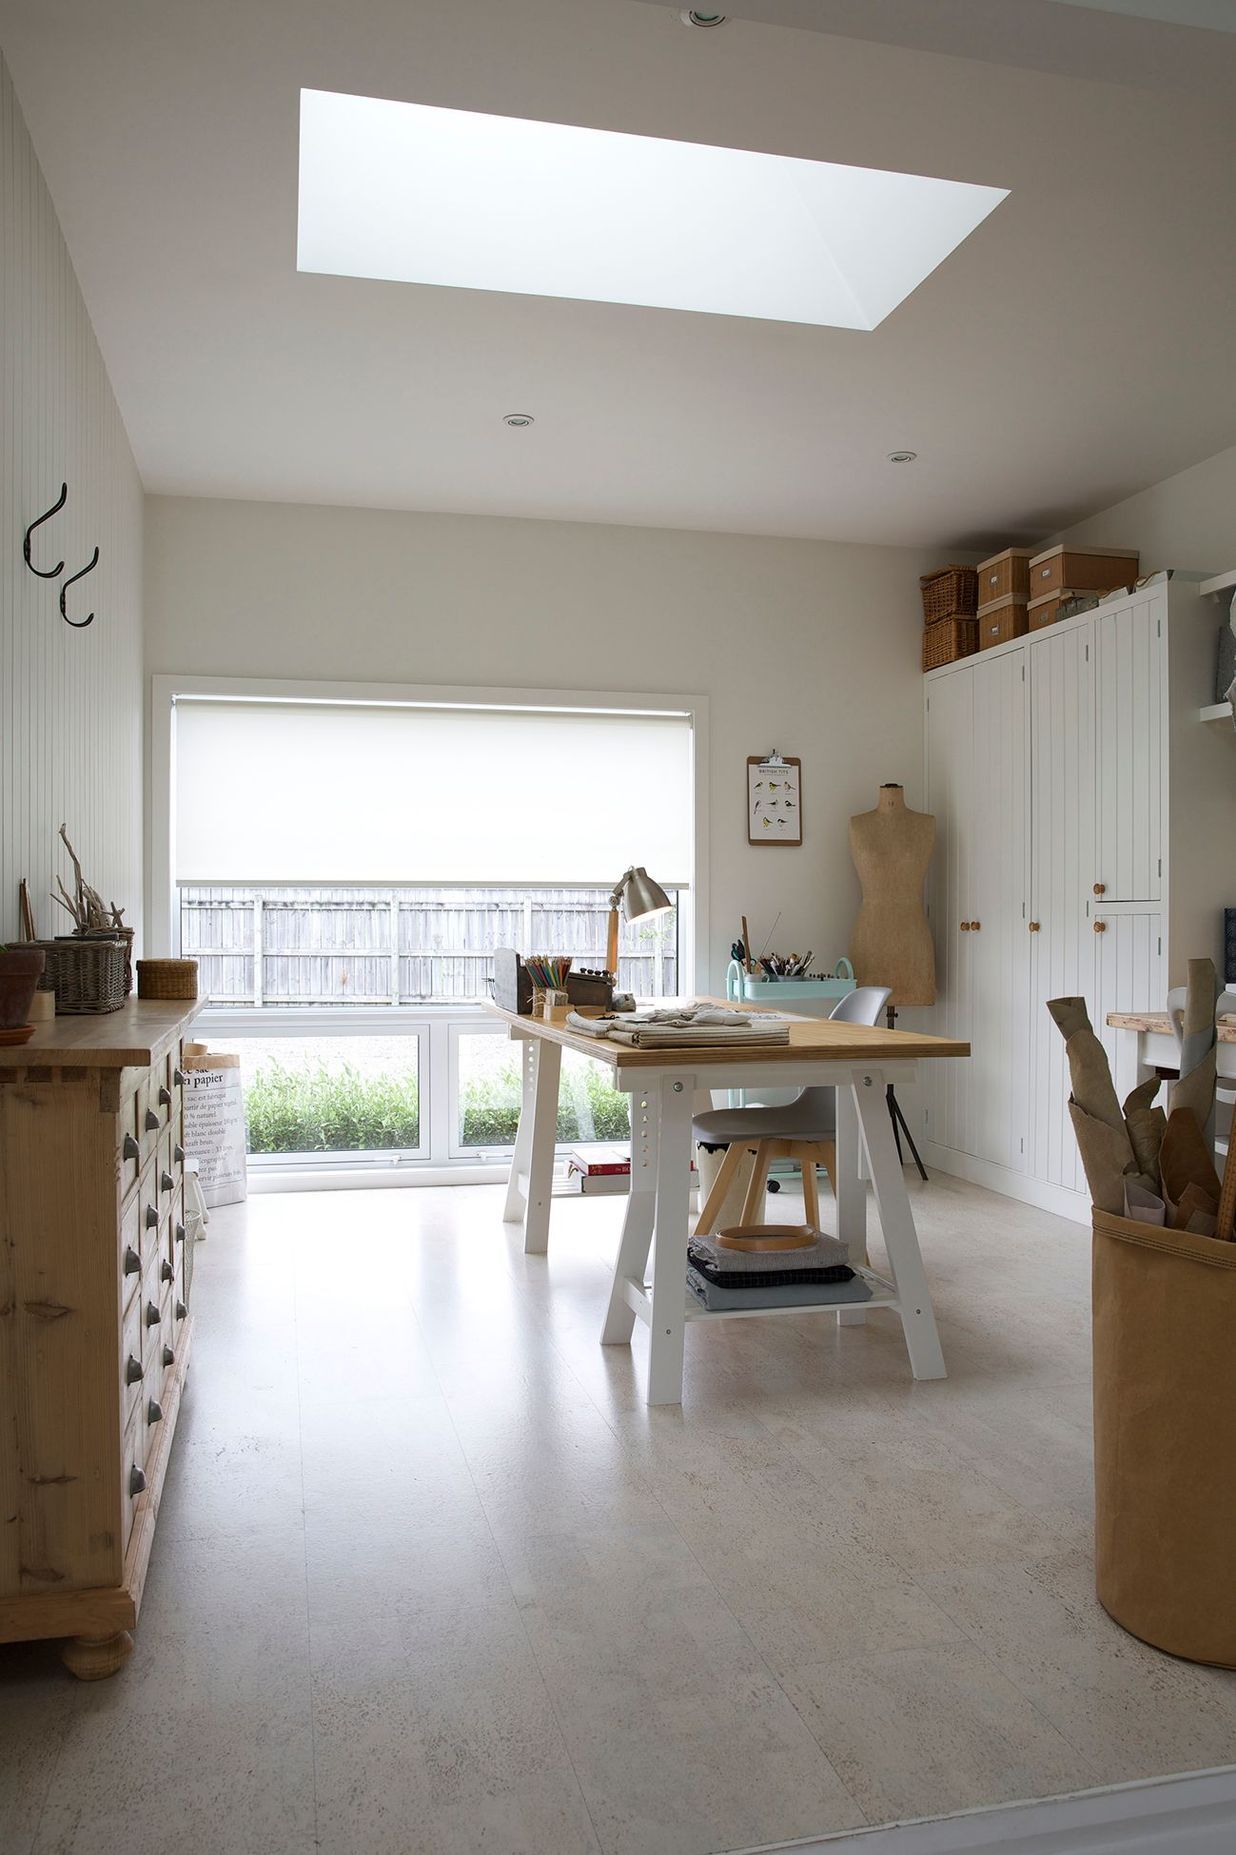 A lightwell in the ceiling of the sewing studio pulls natural sunlight in and over the desk.